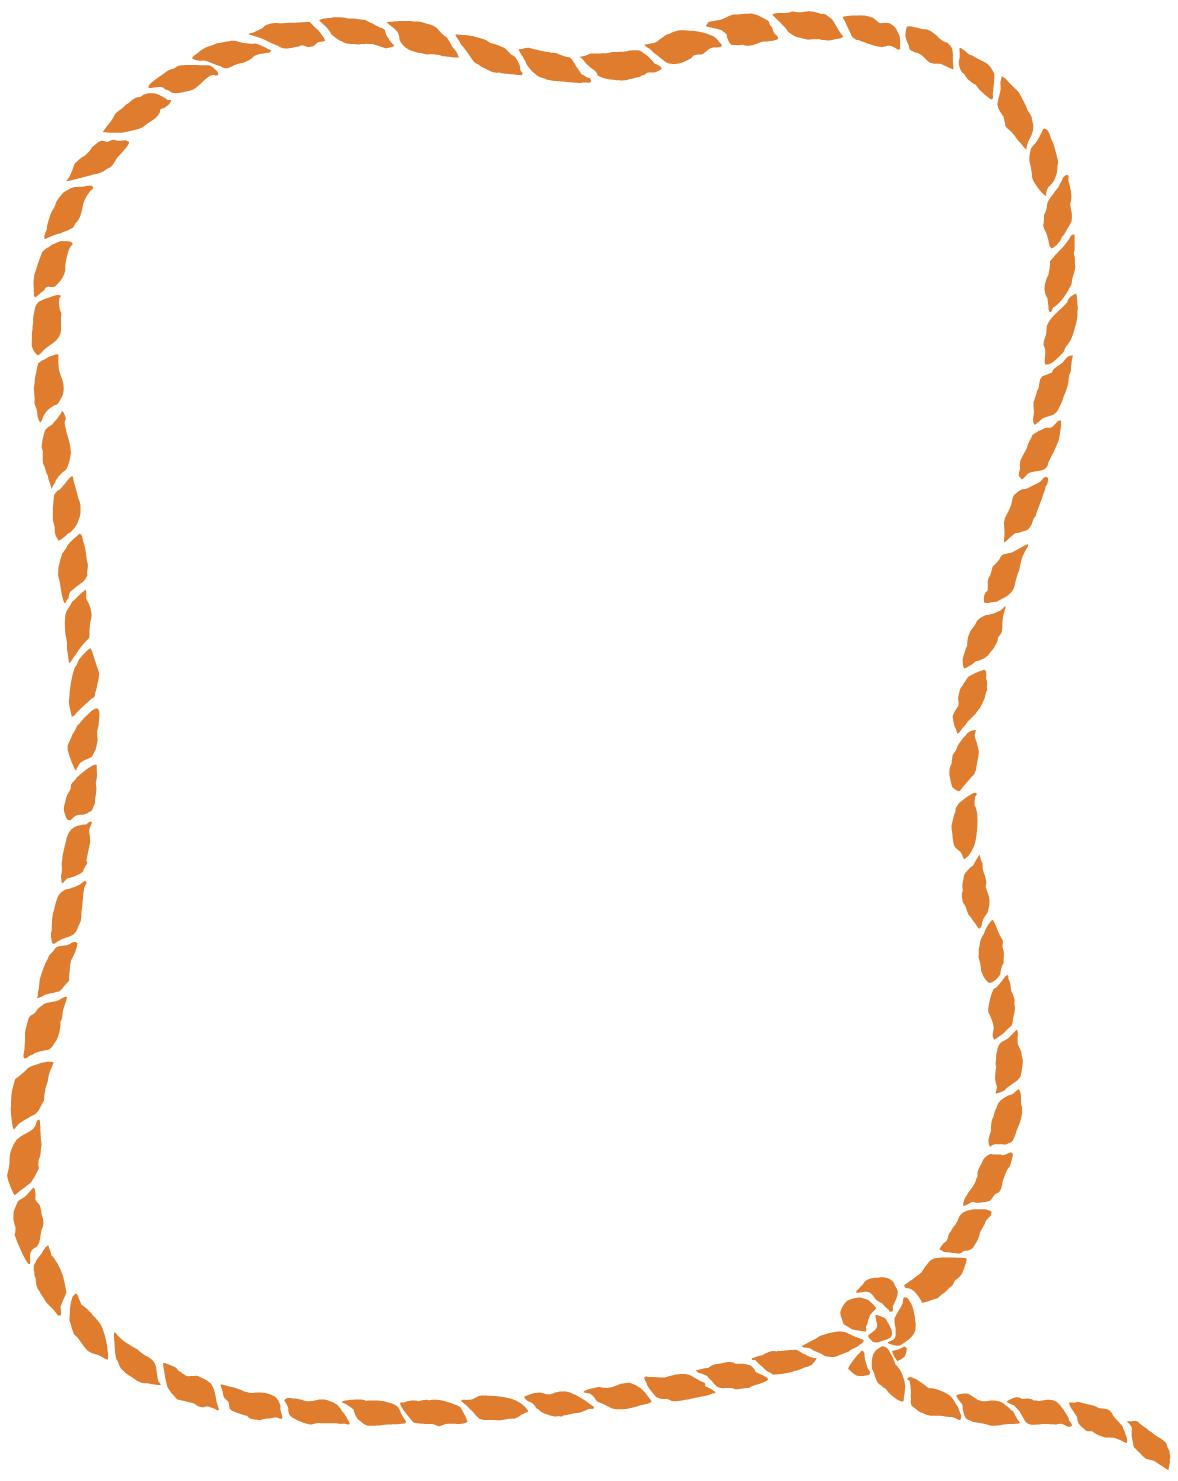 Cowboy With Lasso PNG HD - 128095